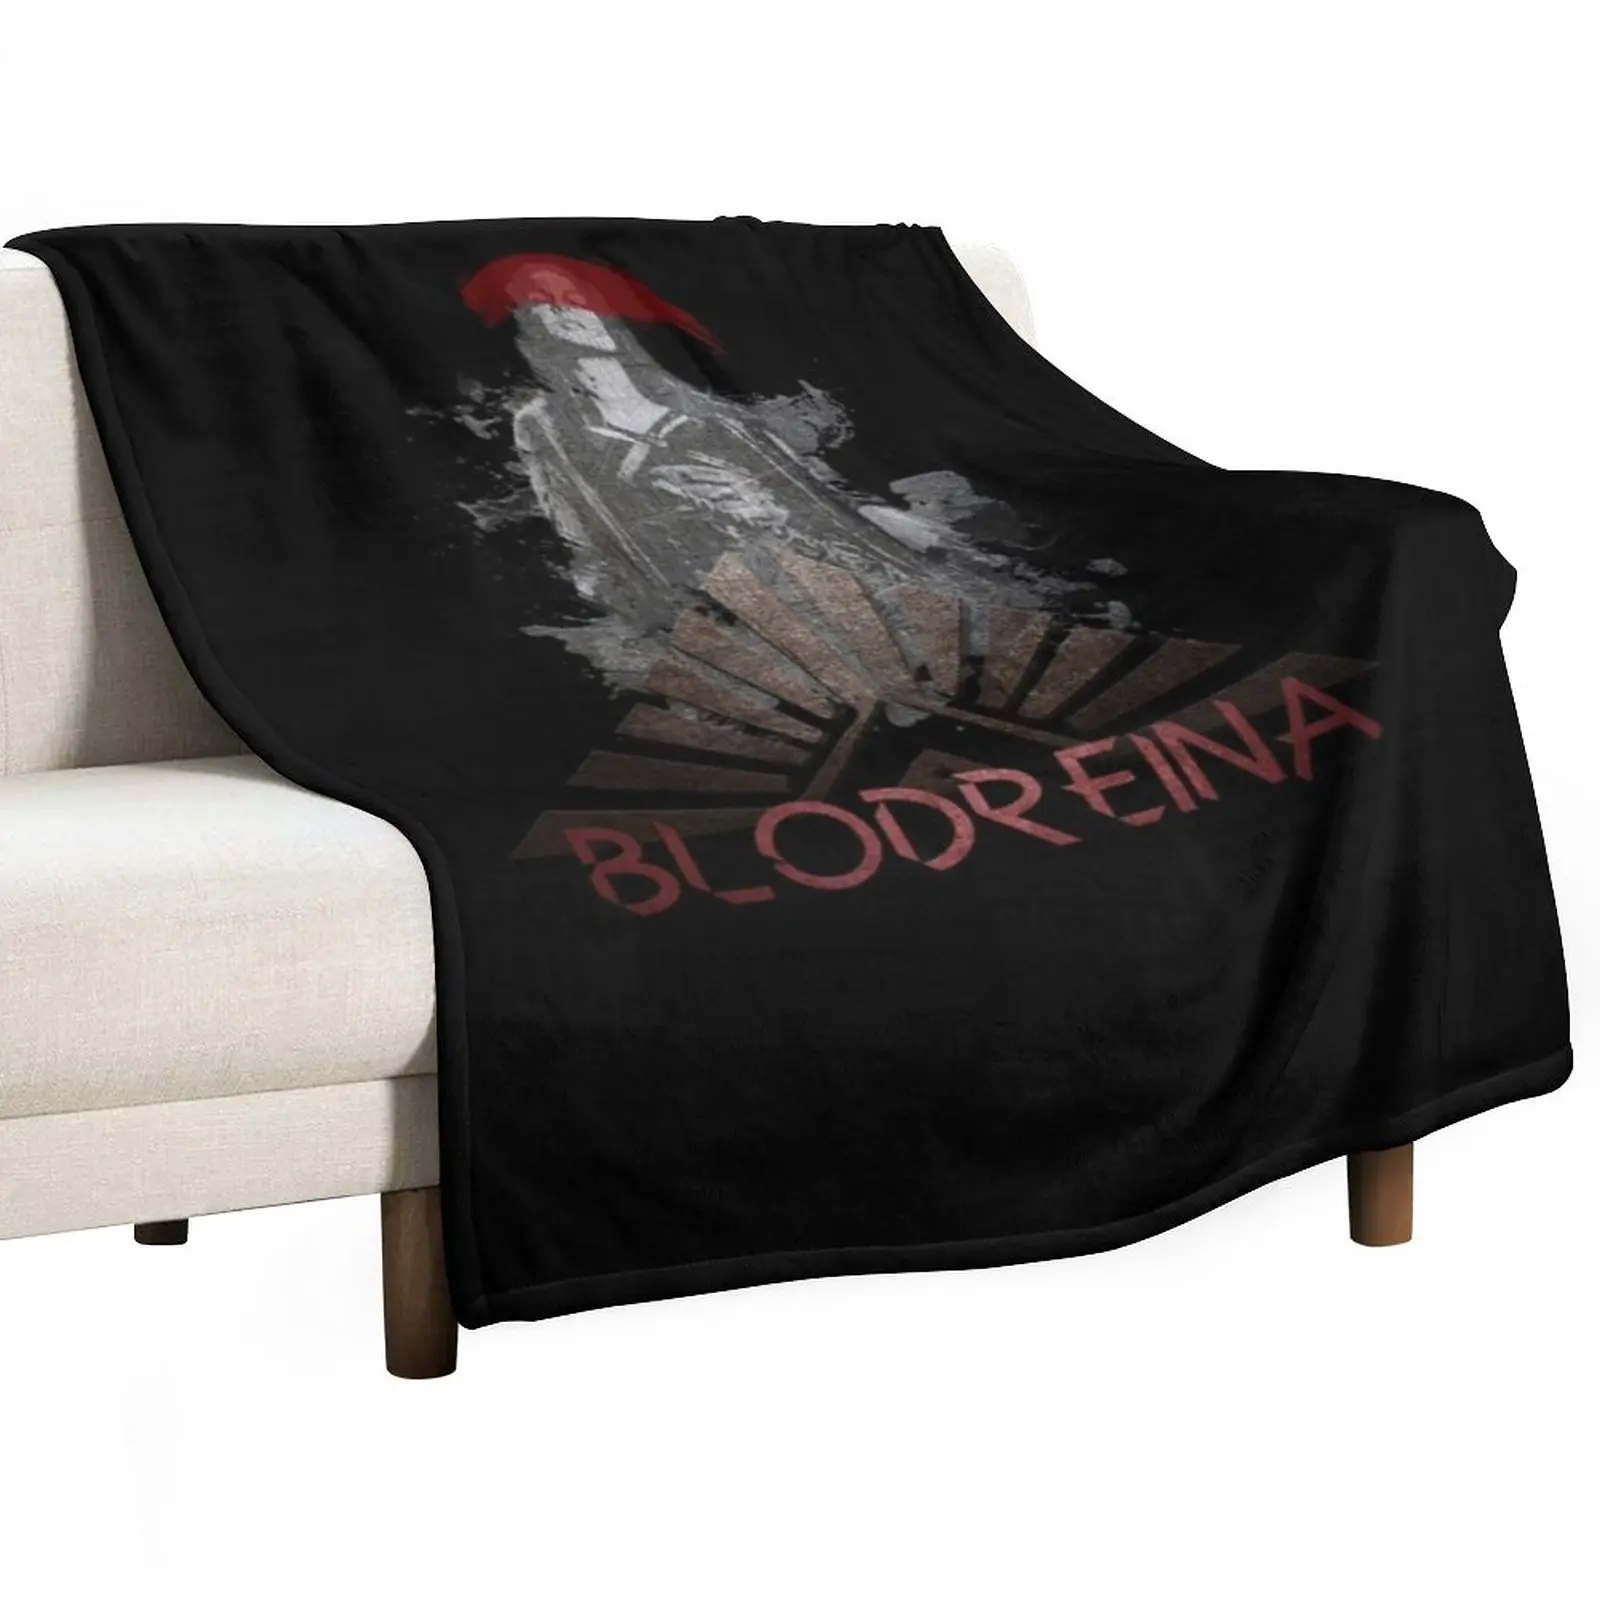 

Blodreina Concept Throw Blanket For Sofa Thin Decorative Bed Blankets wednesday